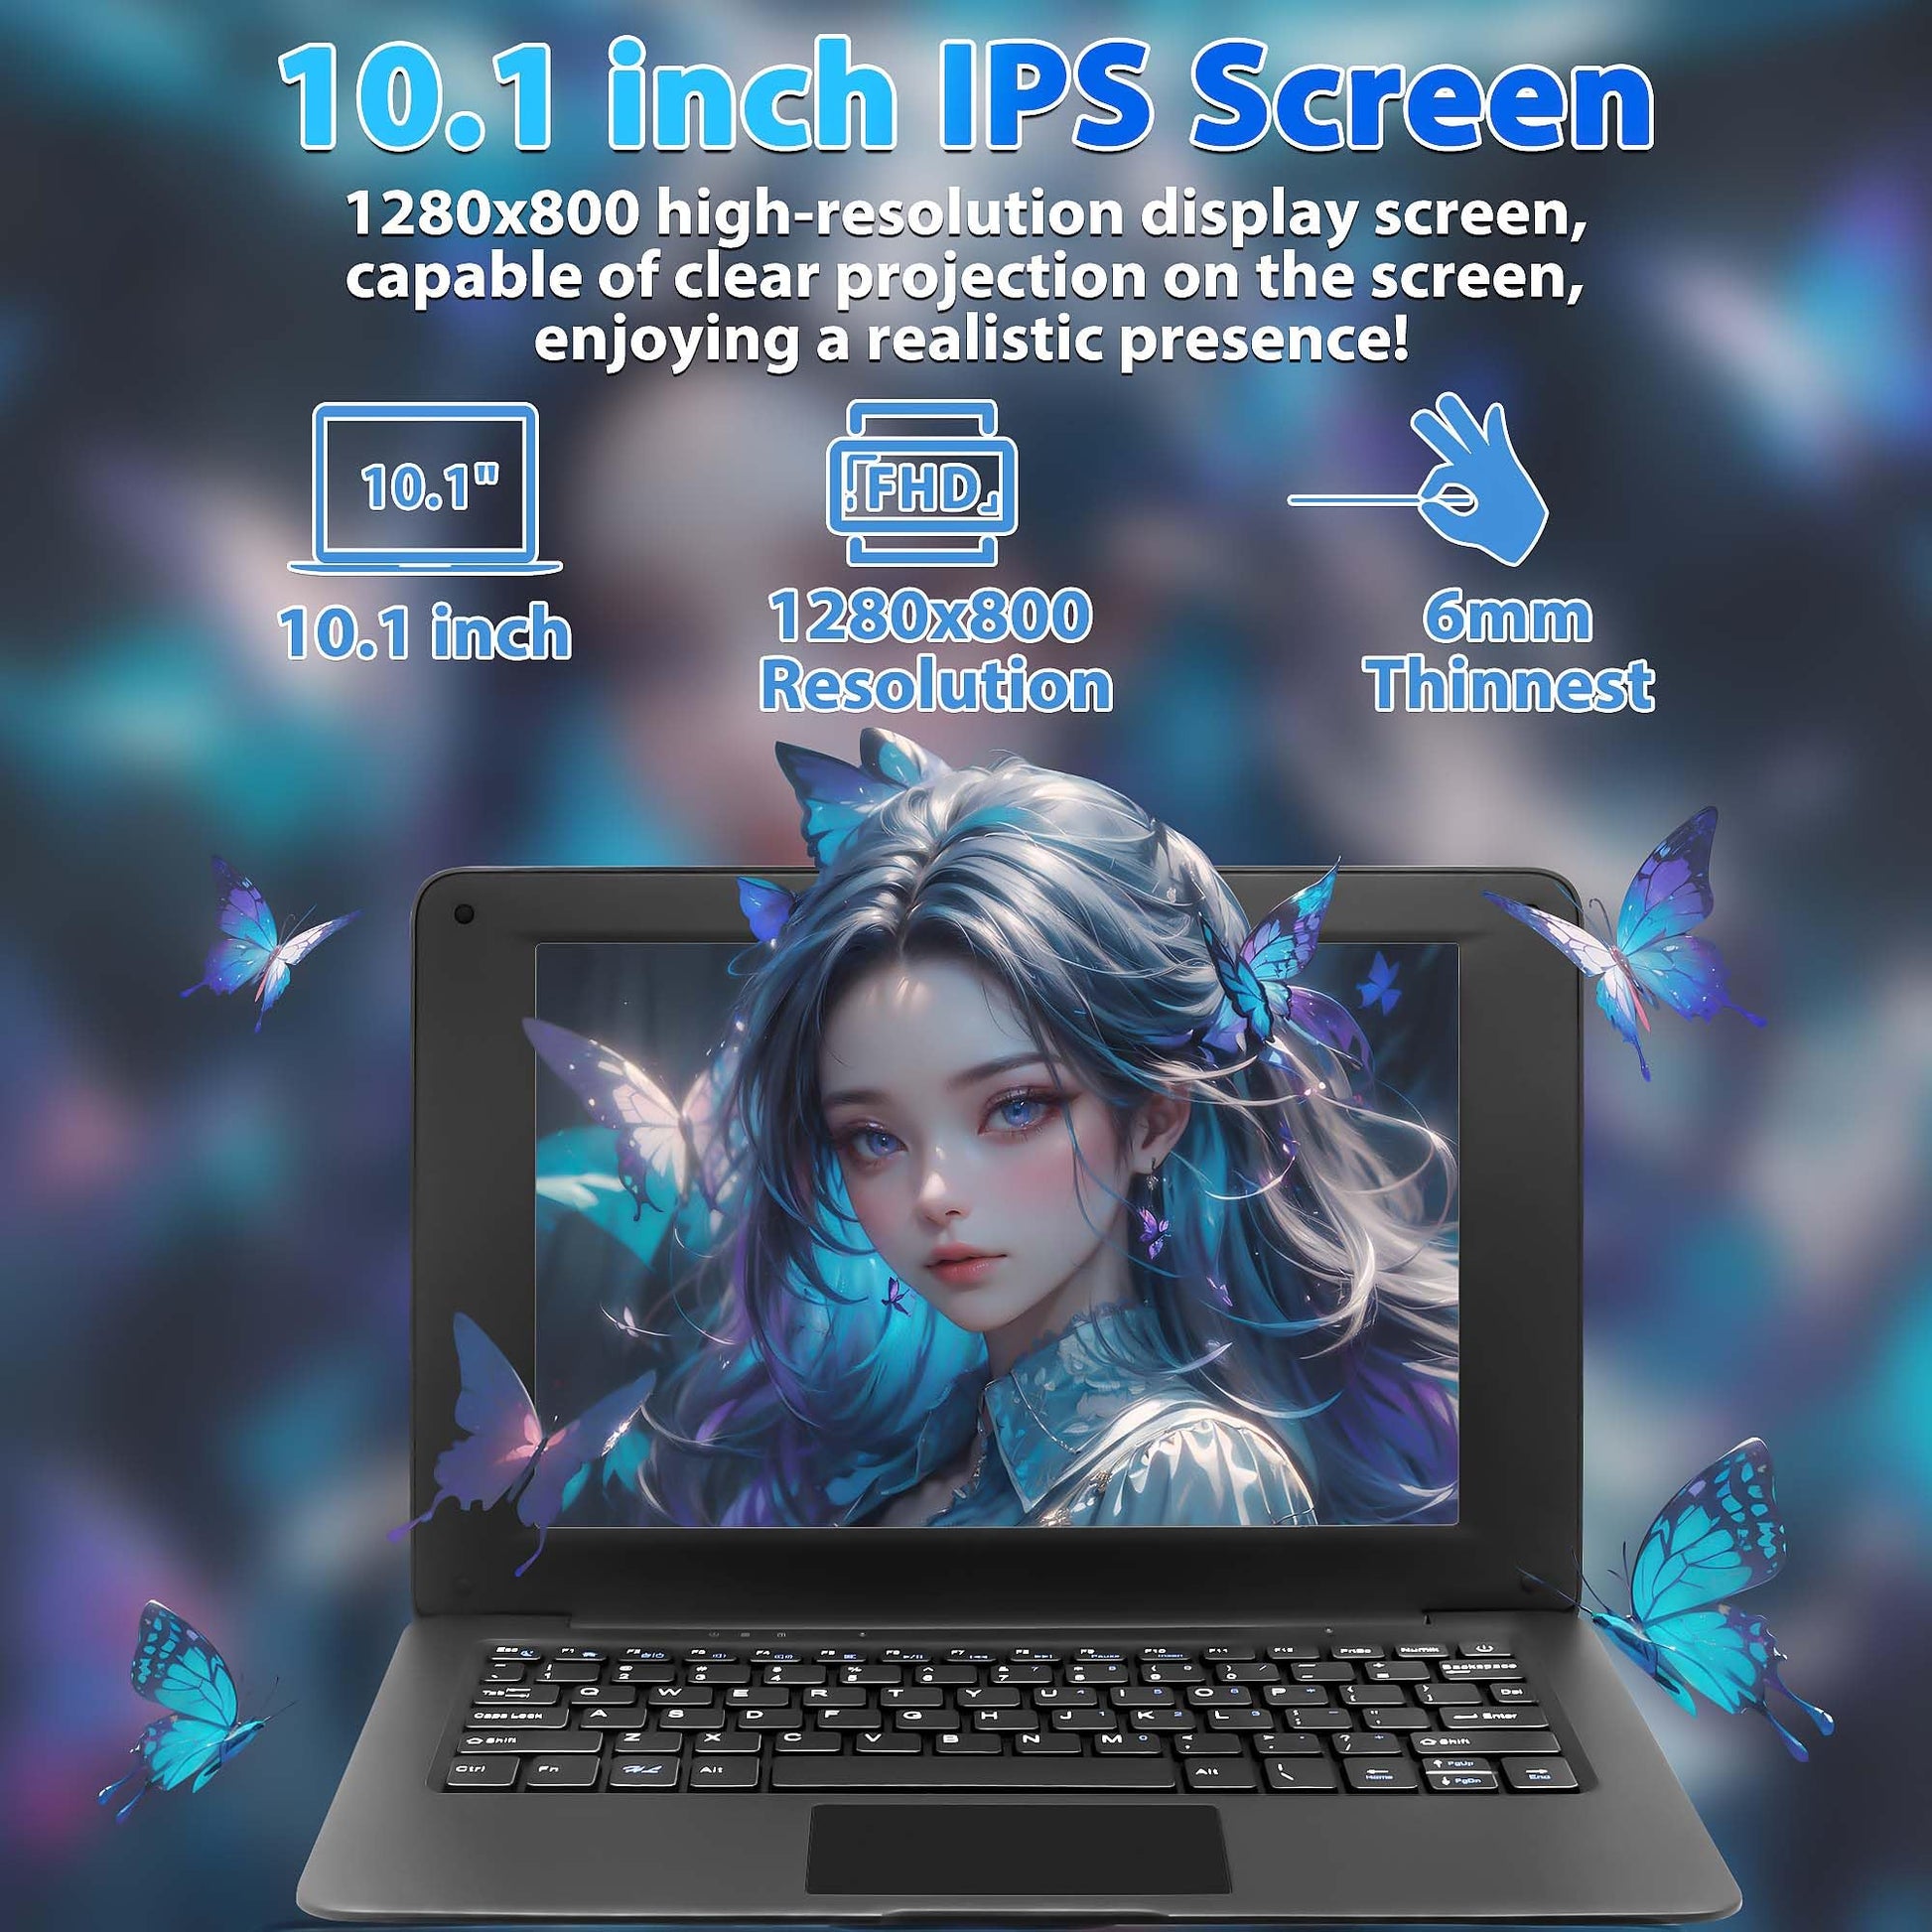 【Win10/Office2019】 10.1'' Compact Mini Laptop/Only 0.8kg / Lightweight and Slim/Mute High-Speed Celeron N3350 CPU, 1280 * 800 IPS, 3GB RAM/64GB ROM,for Beginners, Students, Business and Travel,Black